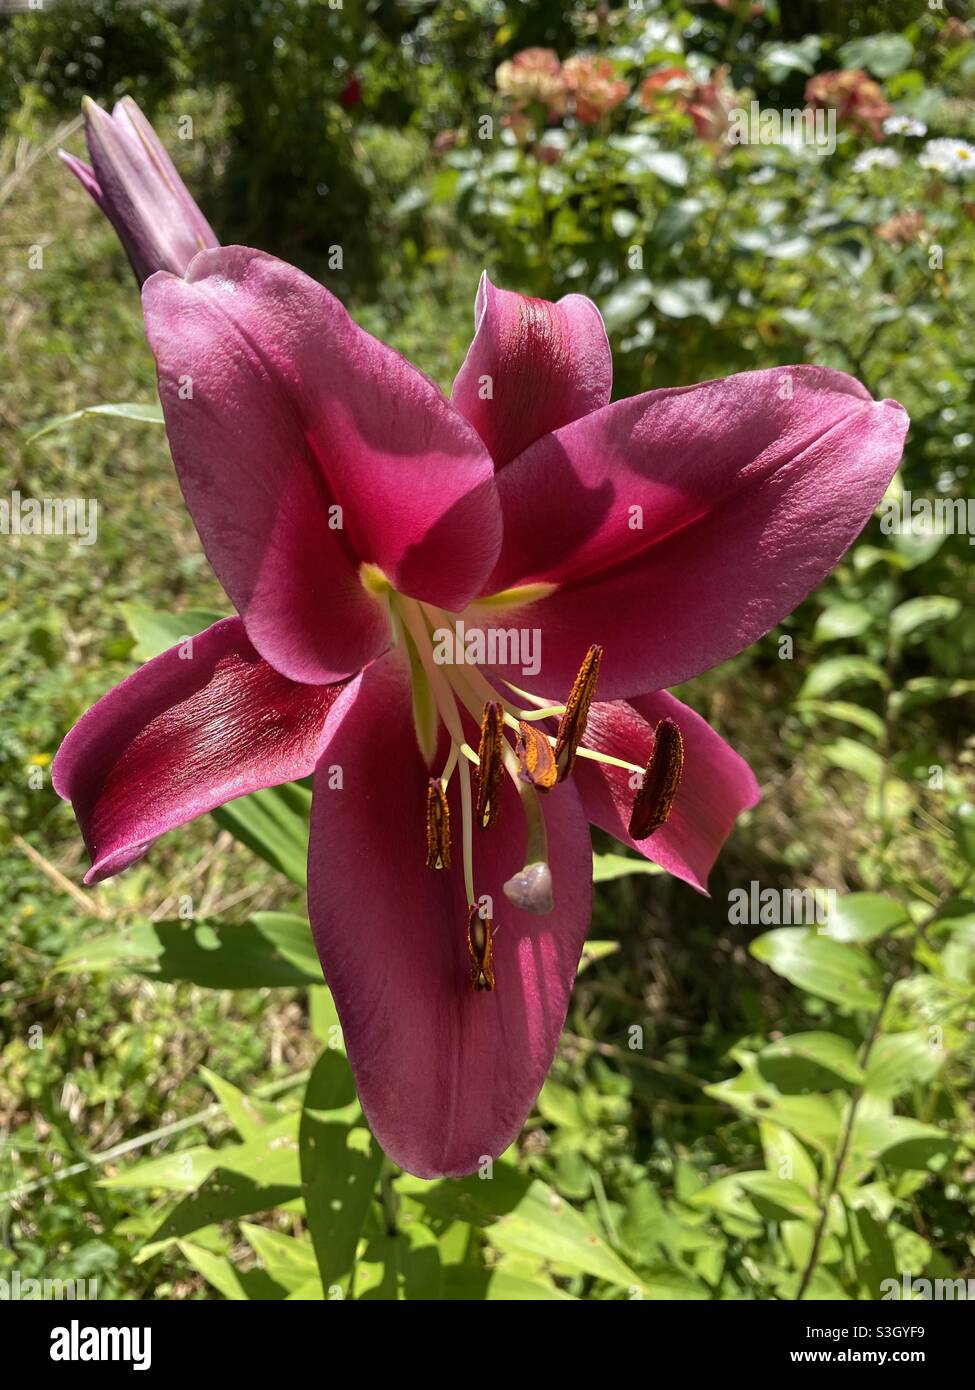 Beautiful lily flower petal in bloom garden nature photography Stock Photo